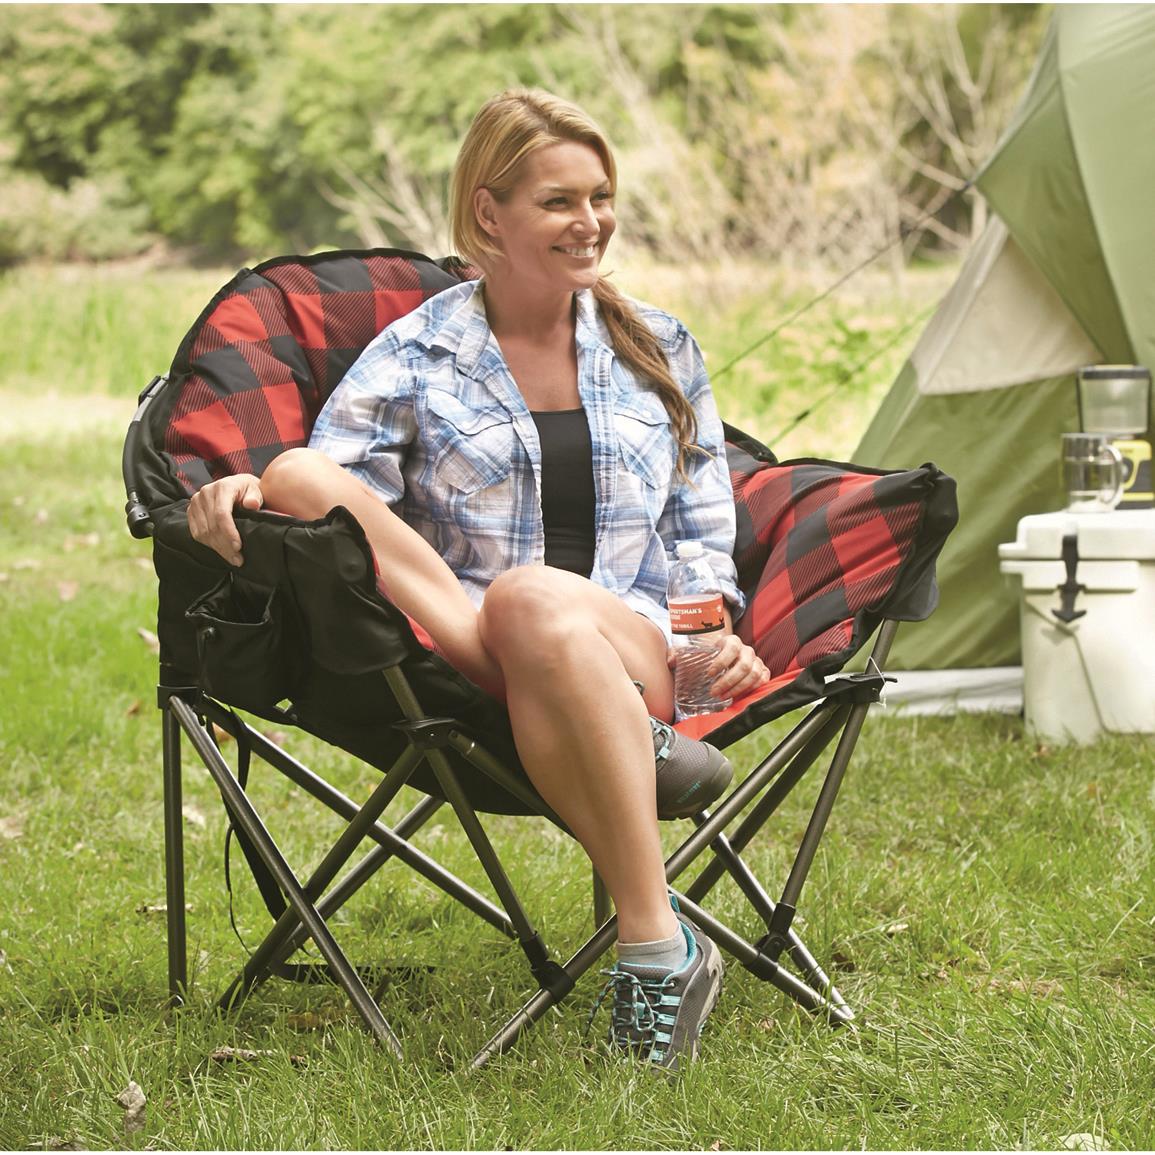 Guide Gear Oversized Club Camp Chair, 500lb. Capacity